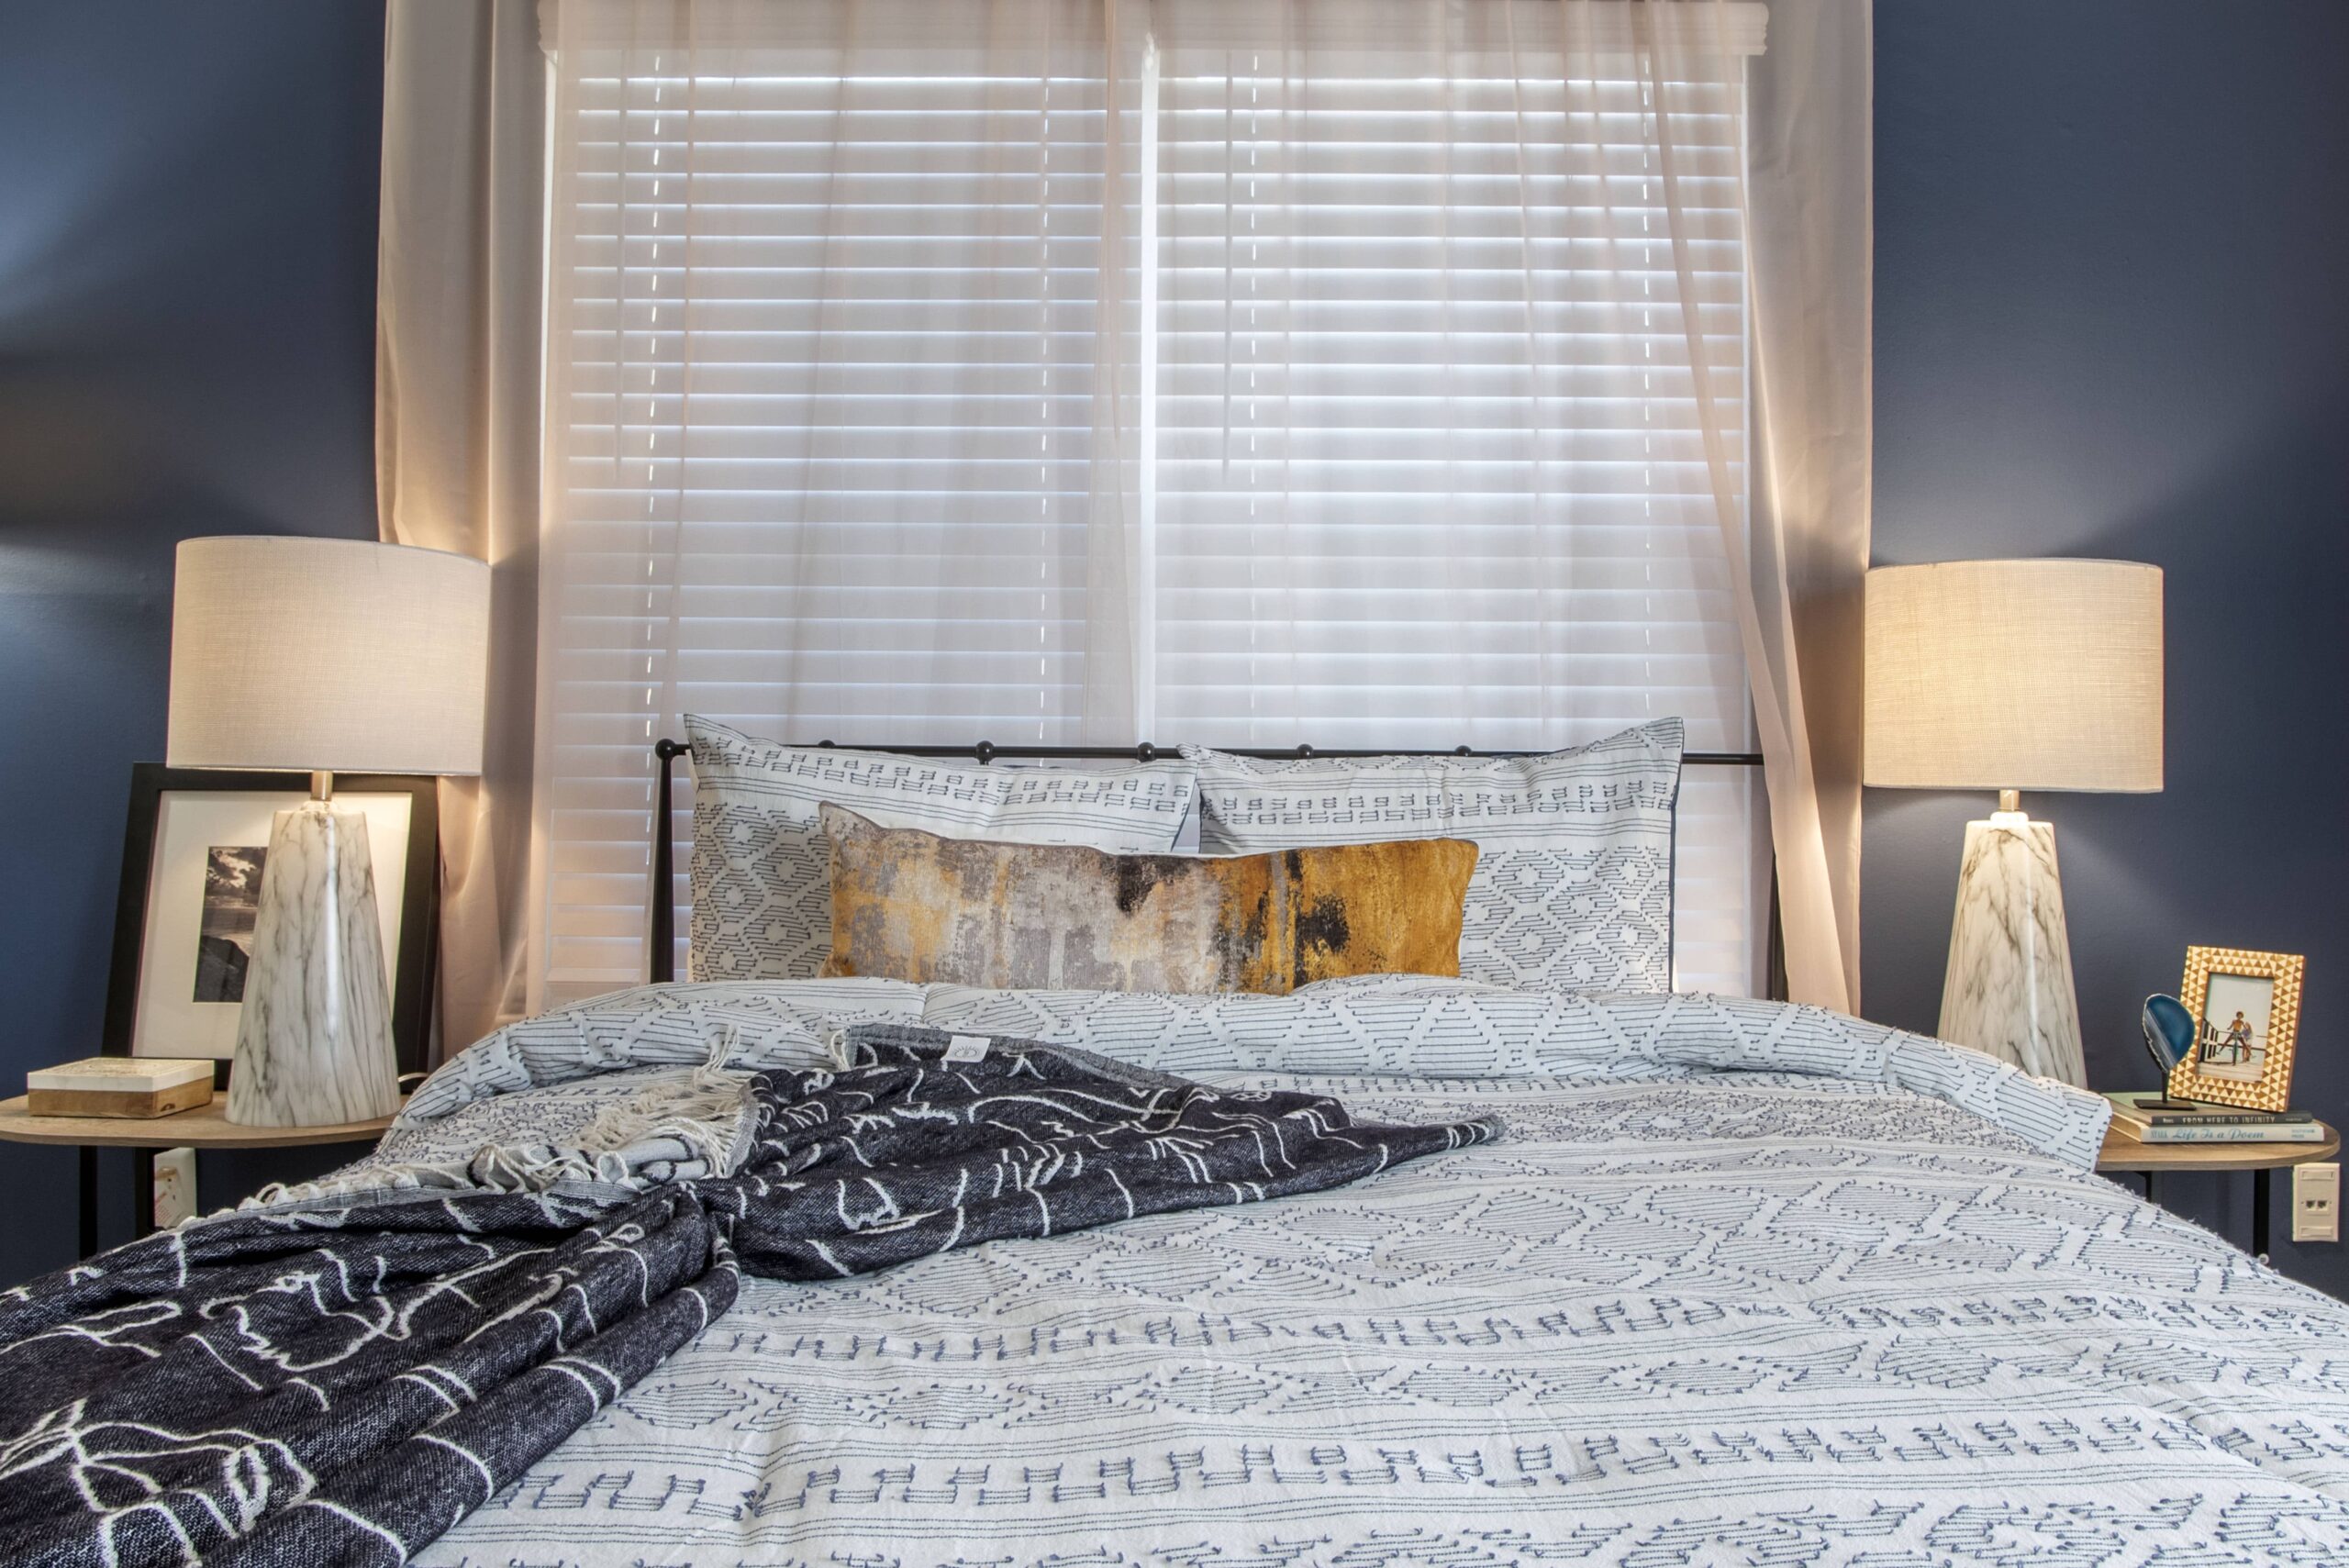 Image of bedding detail at Assembly Manassas Apartment Design Feature